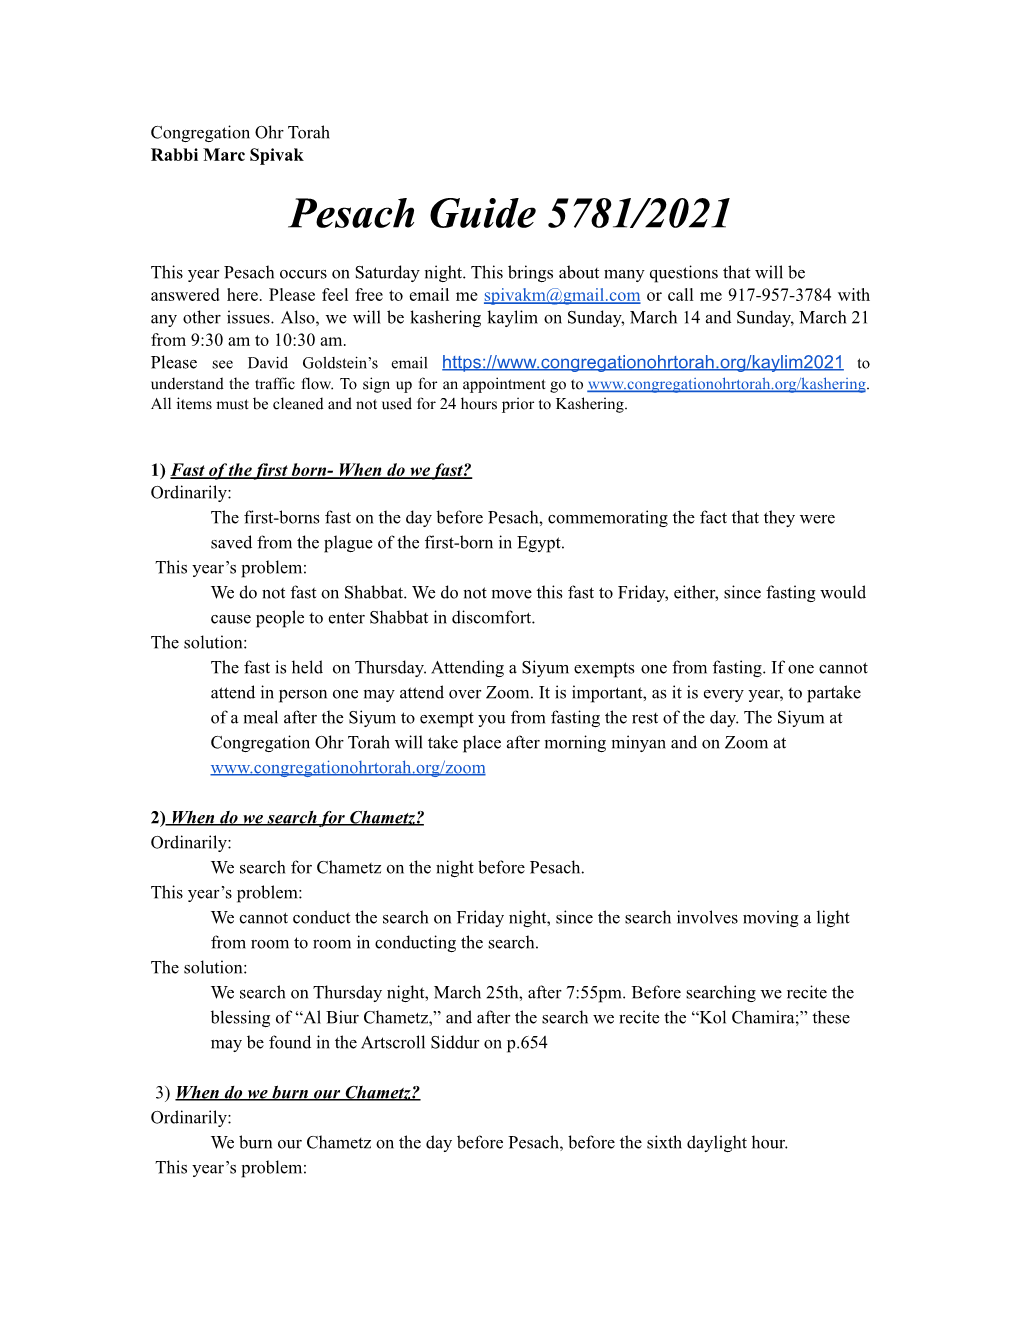 Pesach Guide 5781/2021